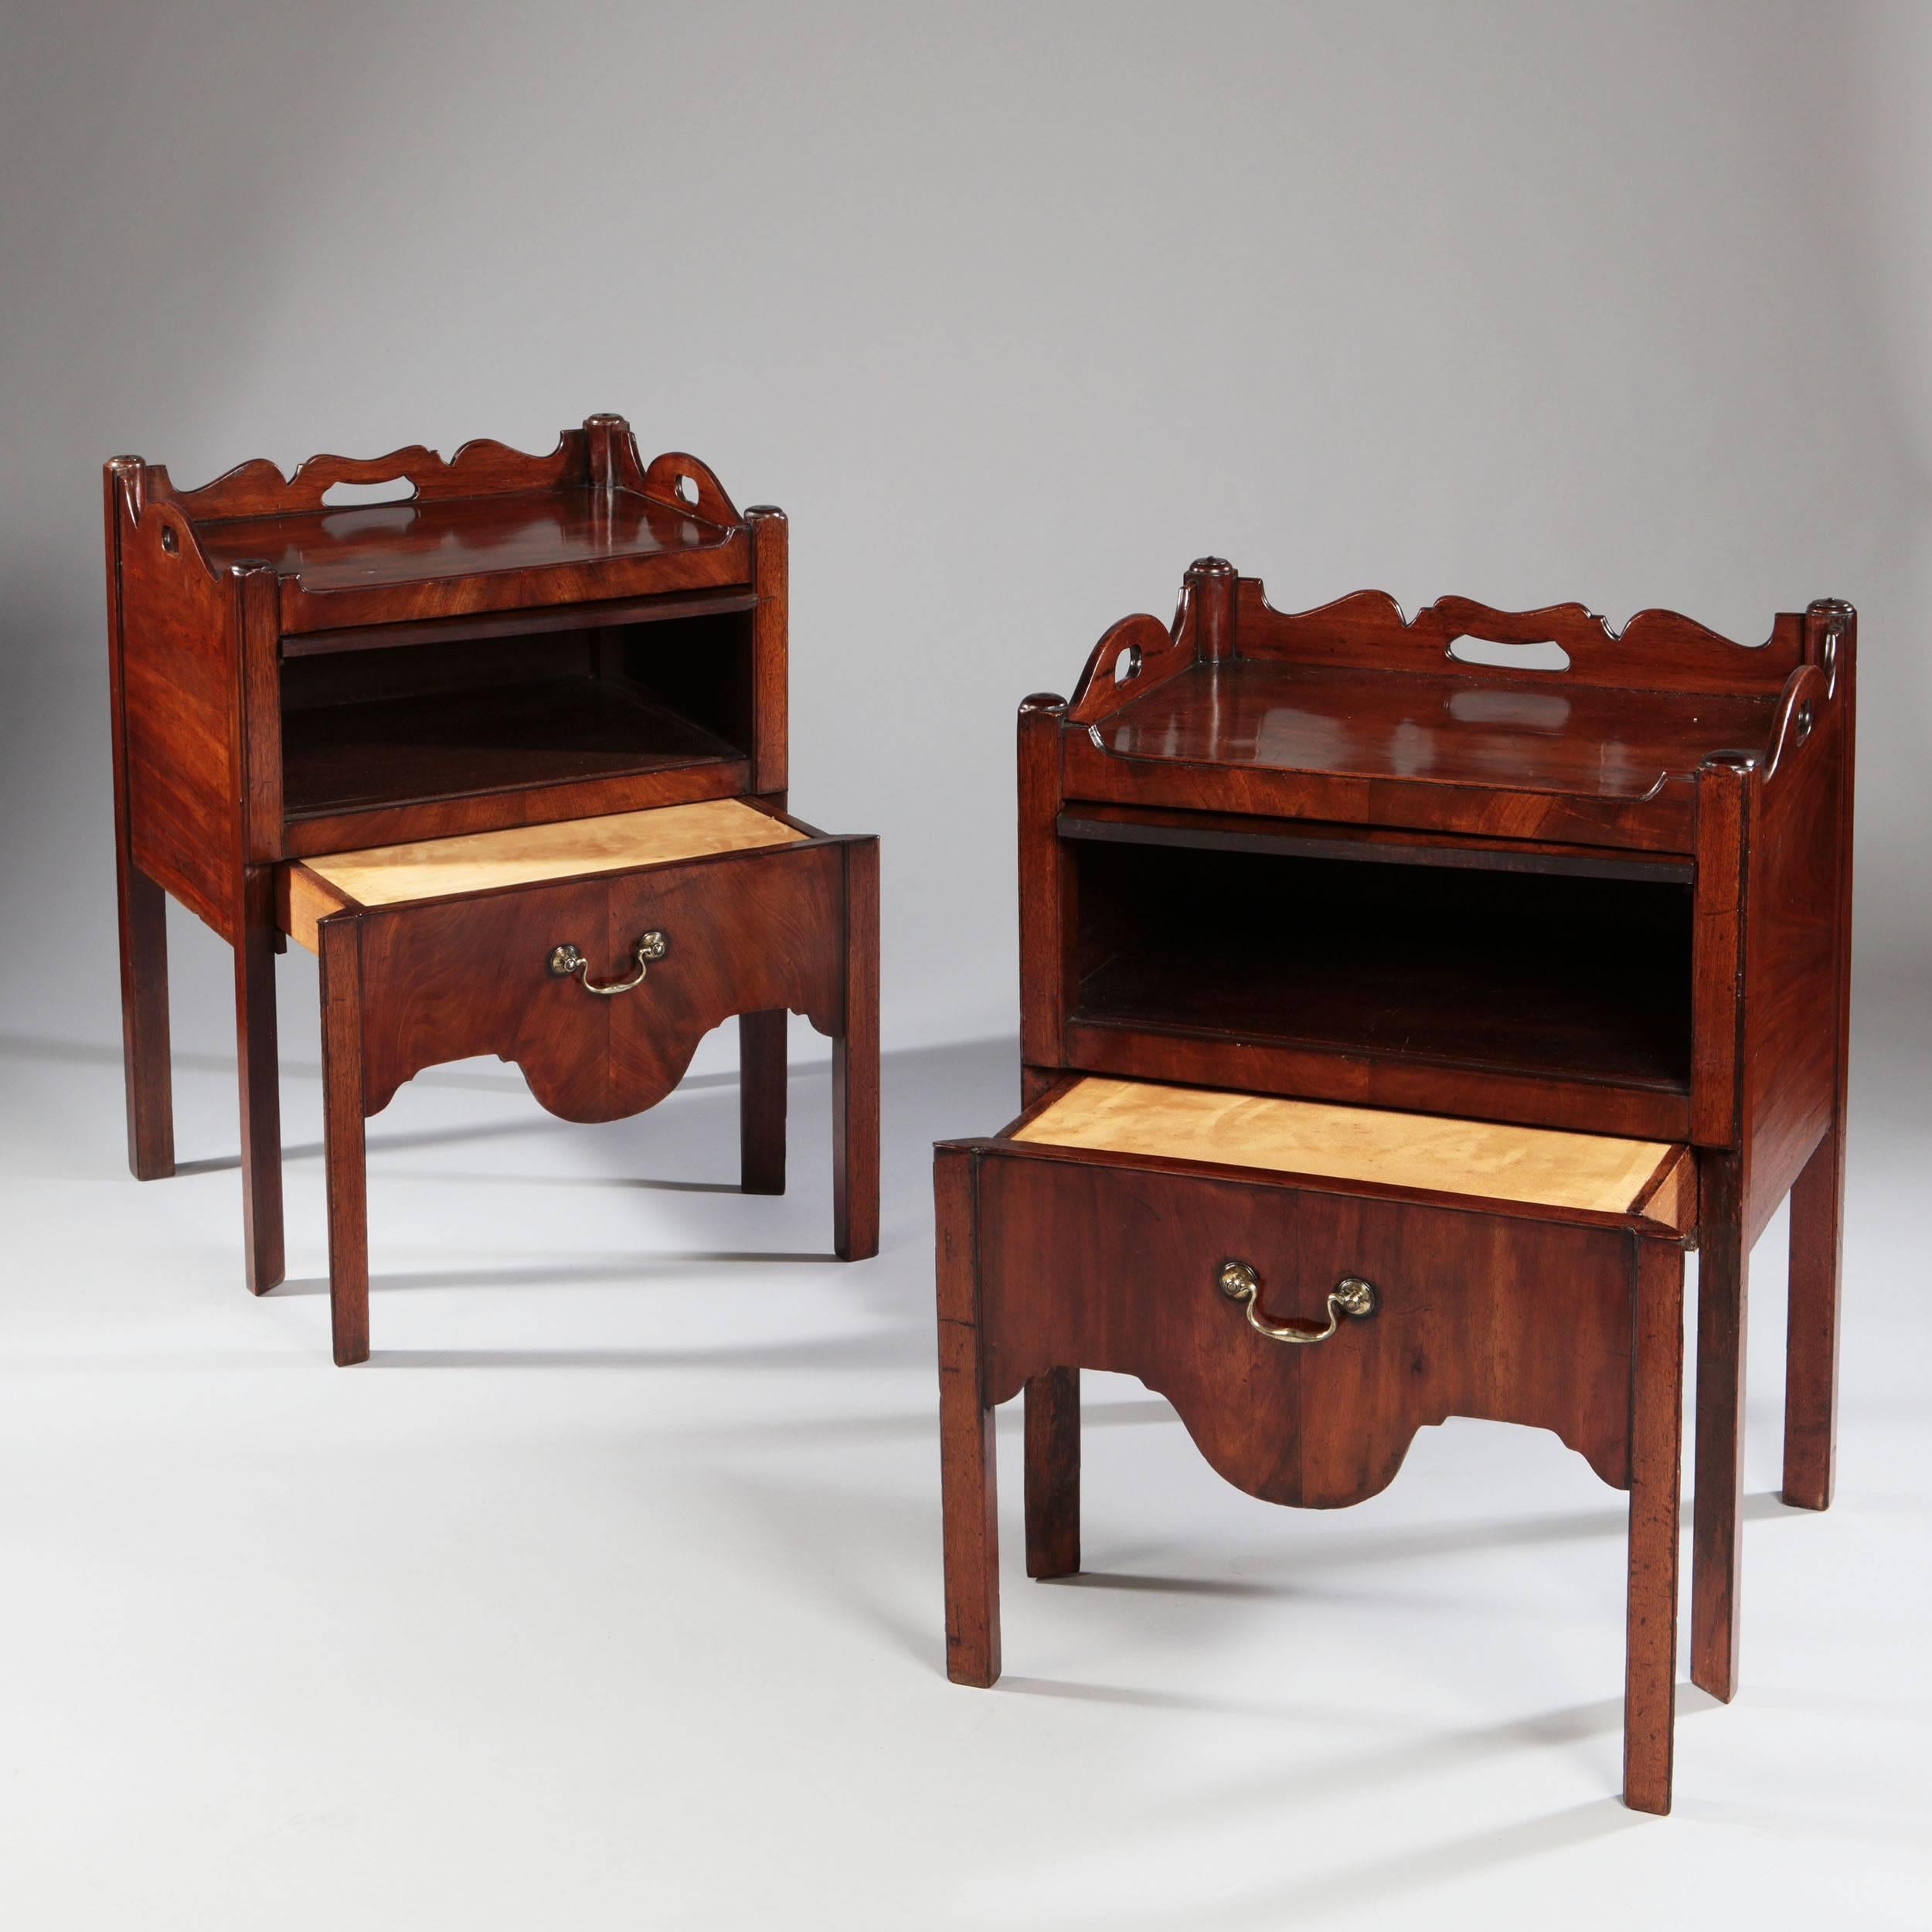 English Fine Matched Pair of Mid-18th Century Bedside Commodes